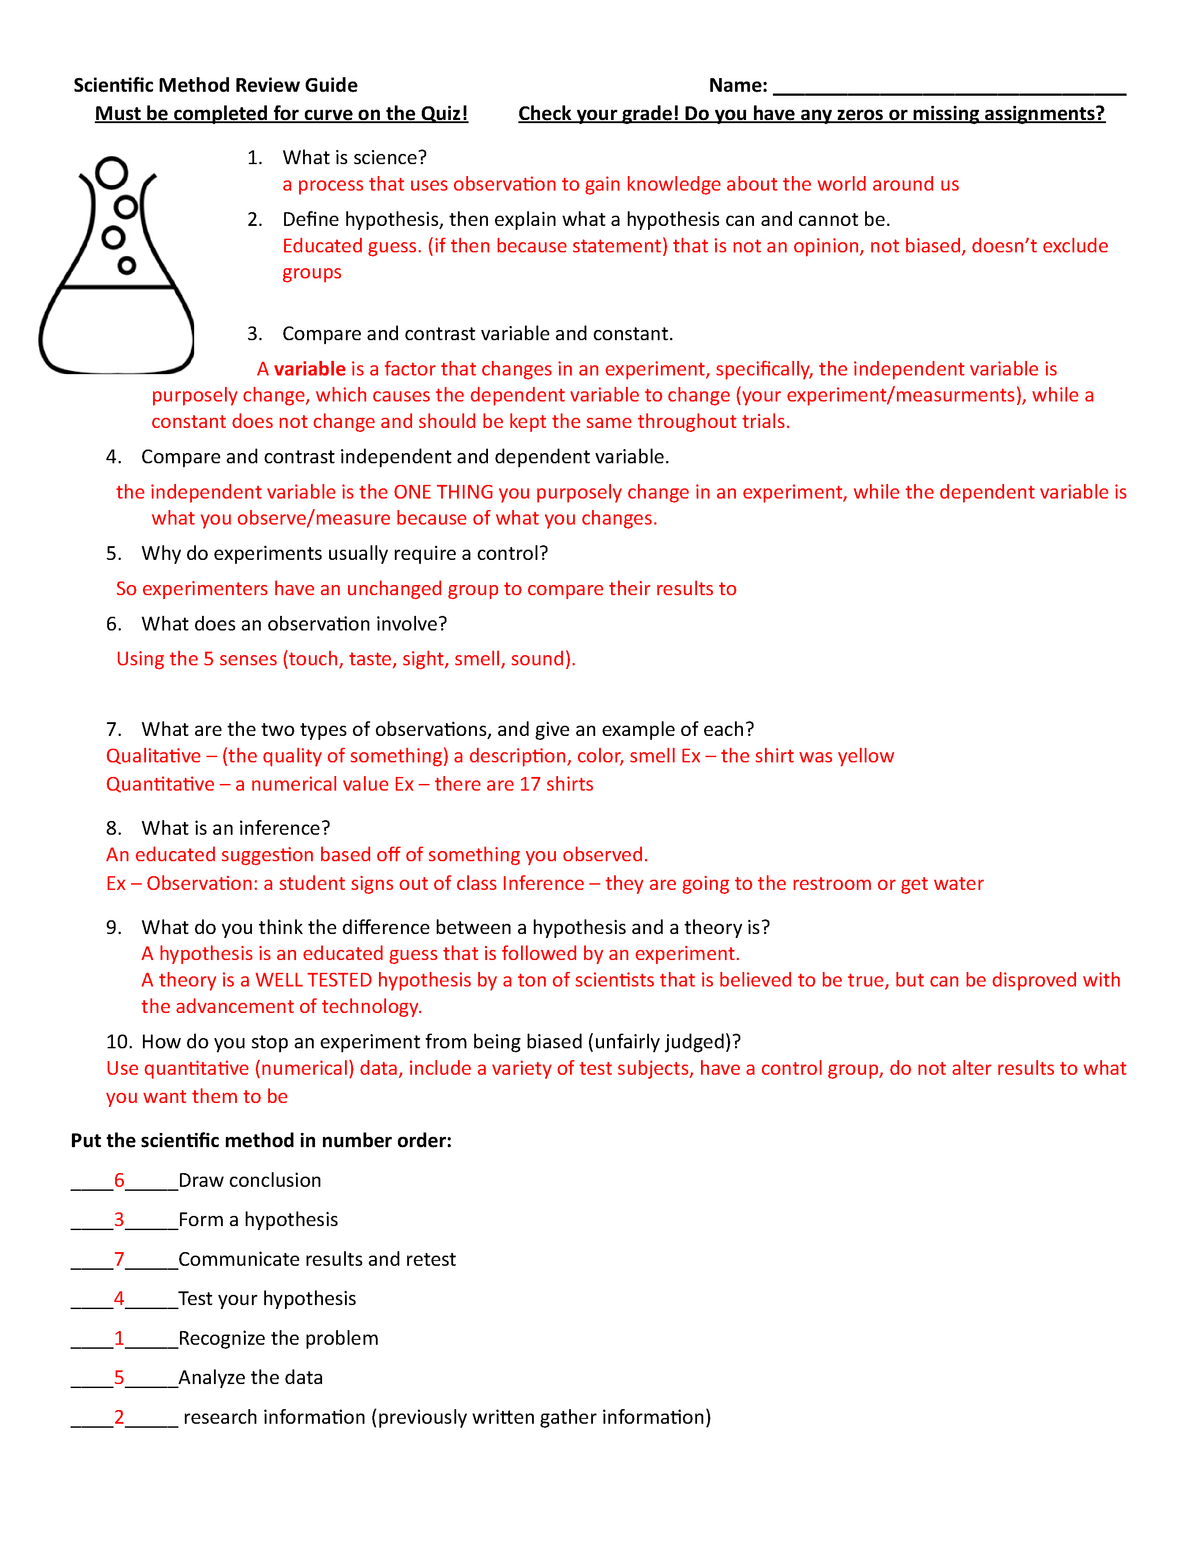 scientific-method-review-guide-answer-key-scientific-method-review